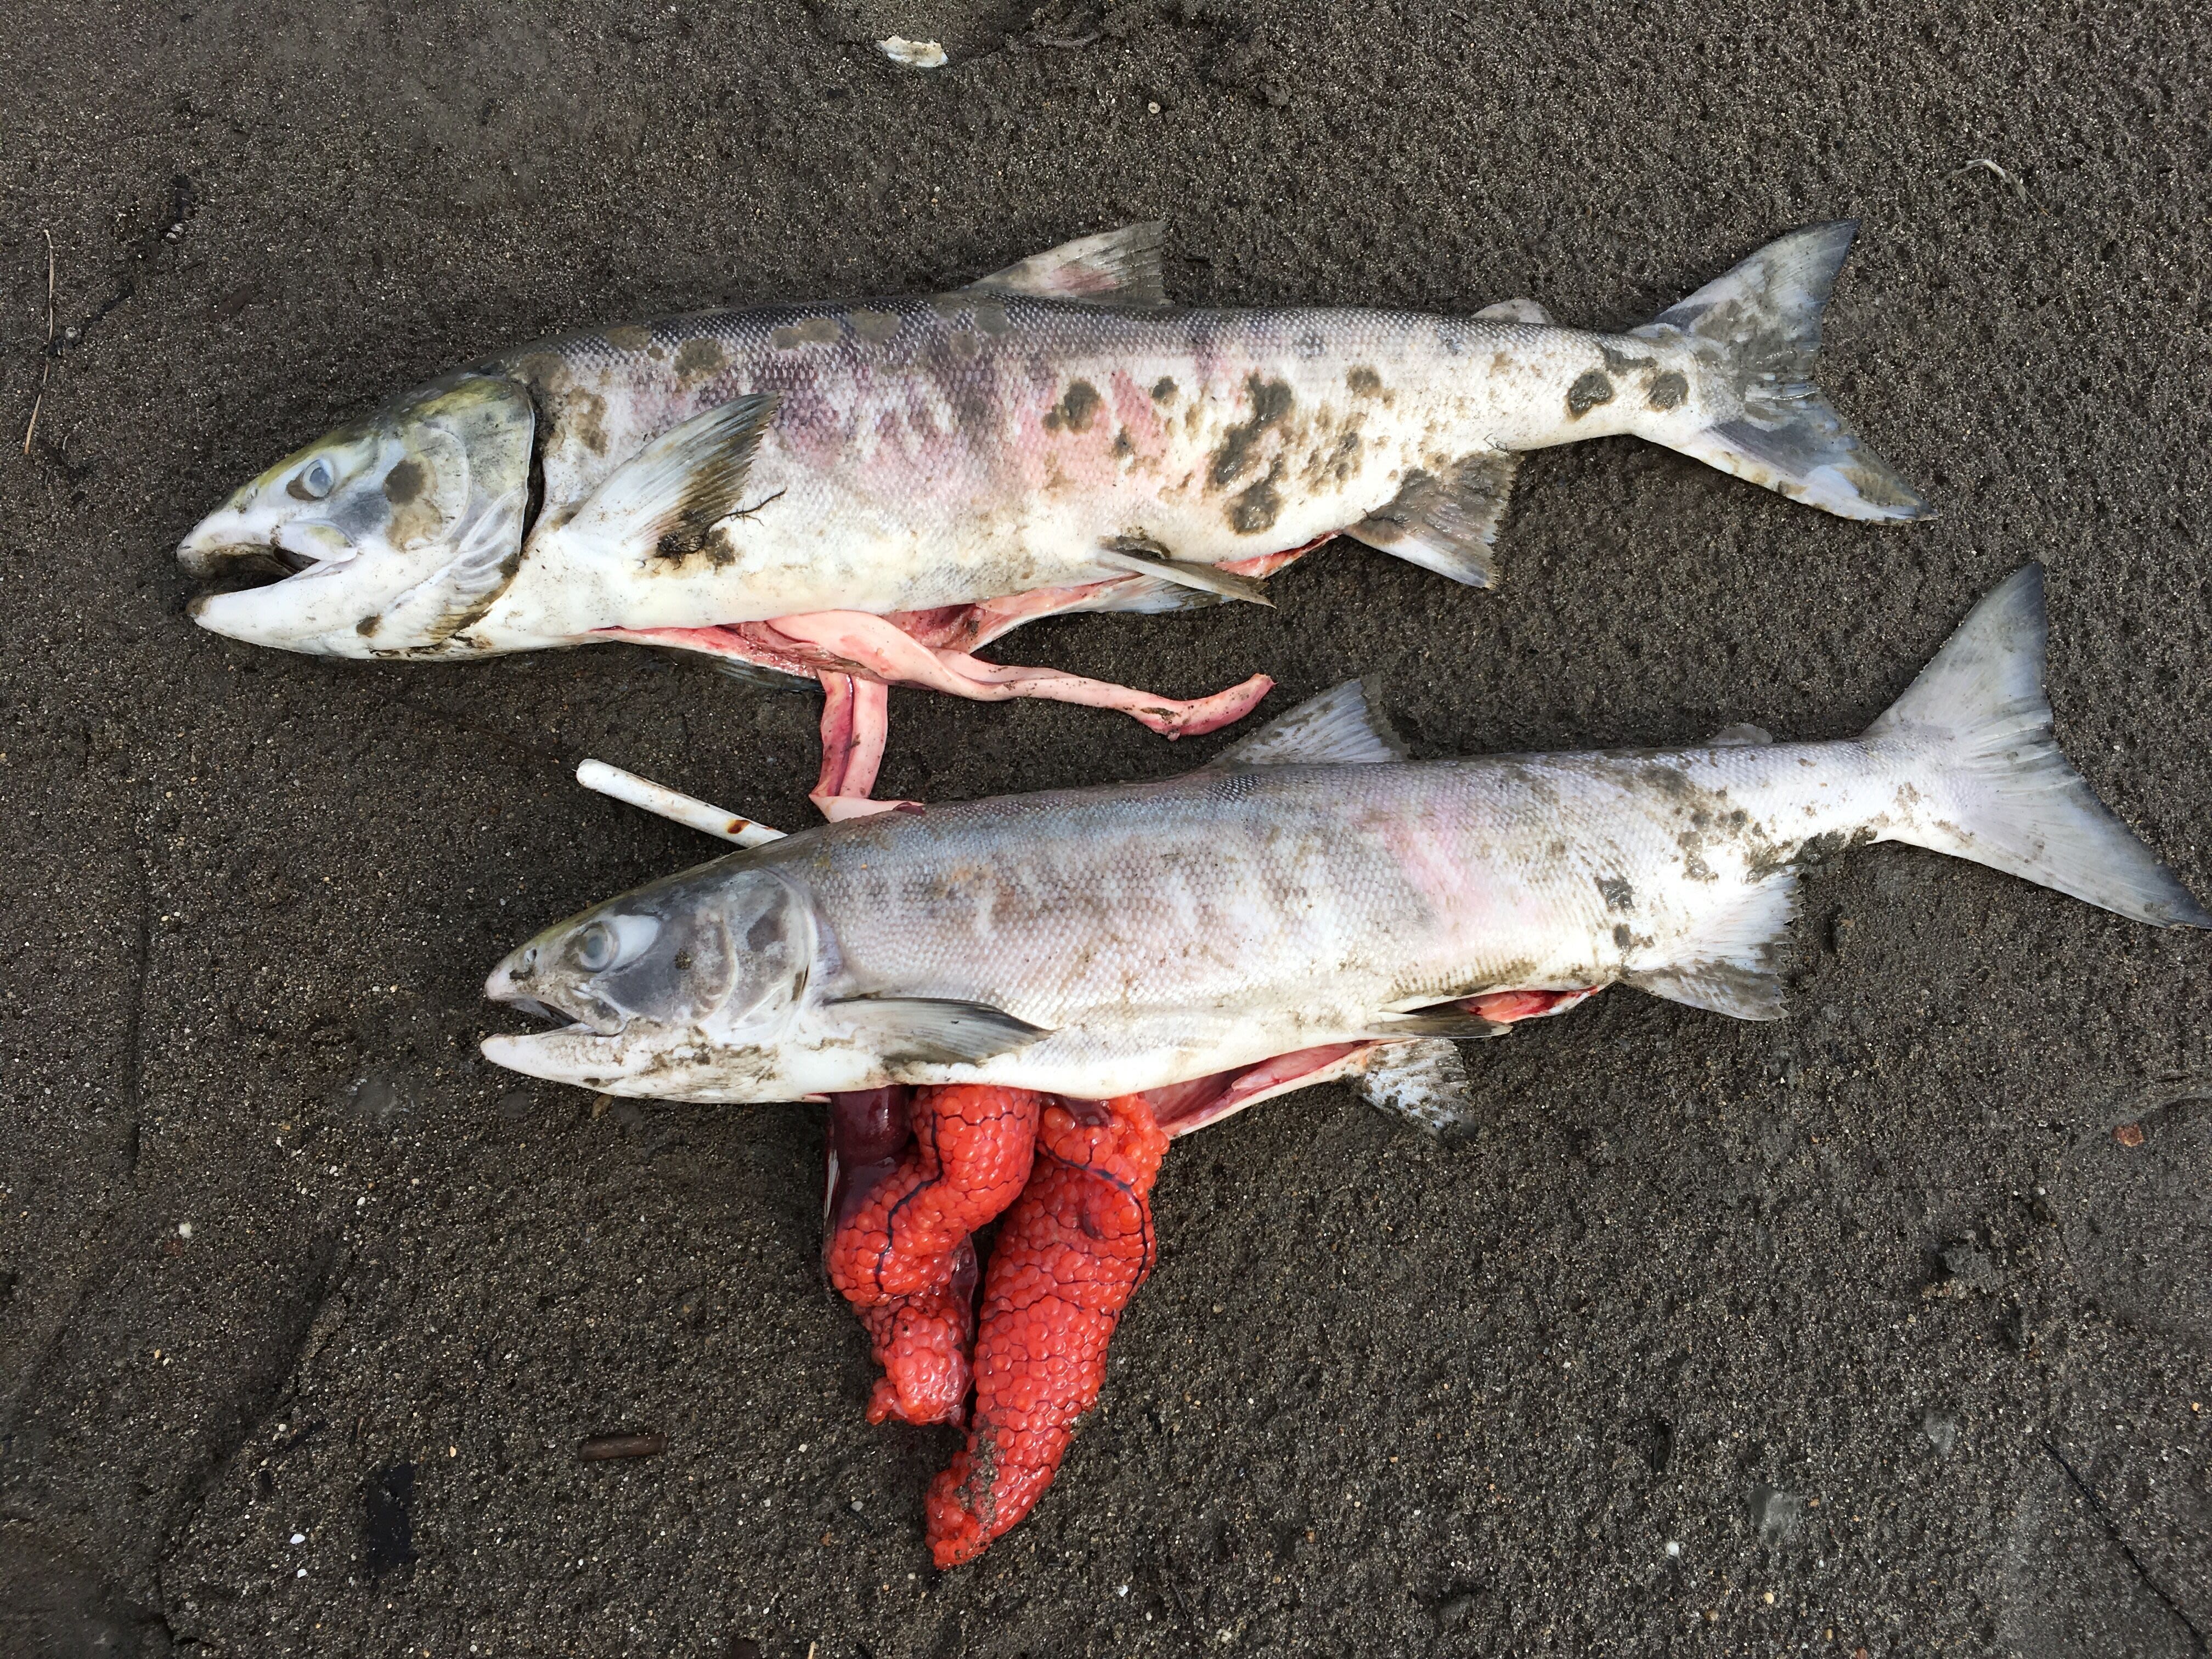 The water is so hot in Alaska it's killing large numbers of salmon